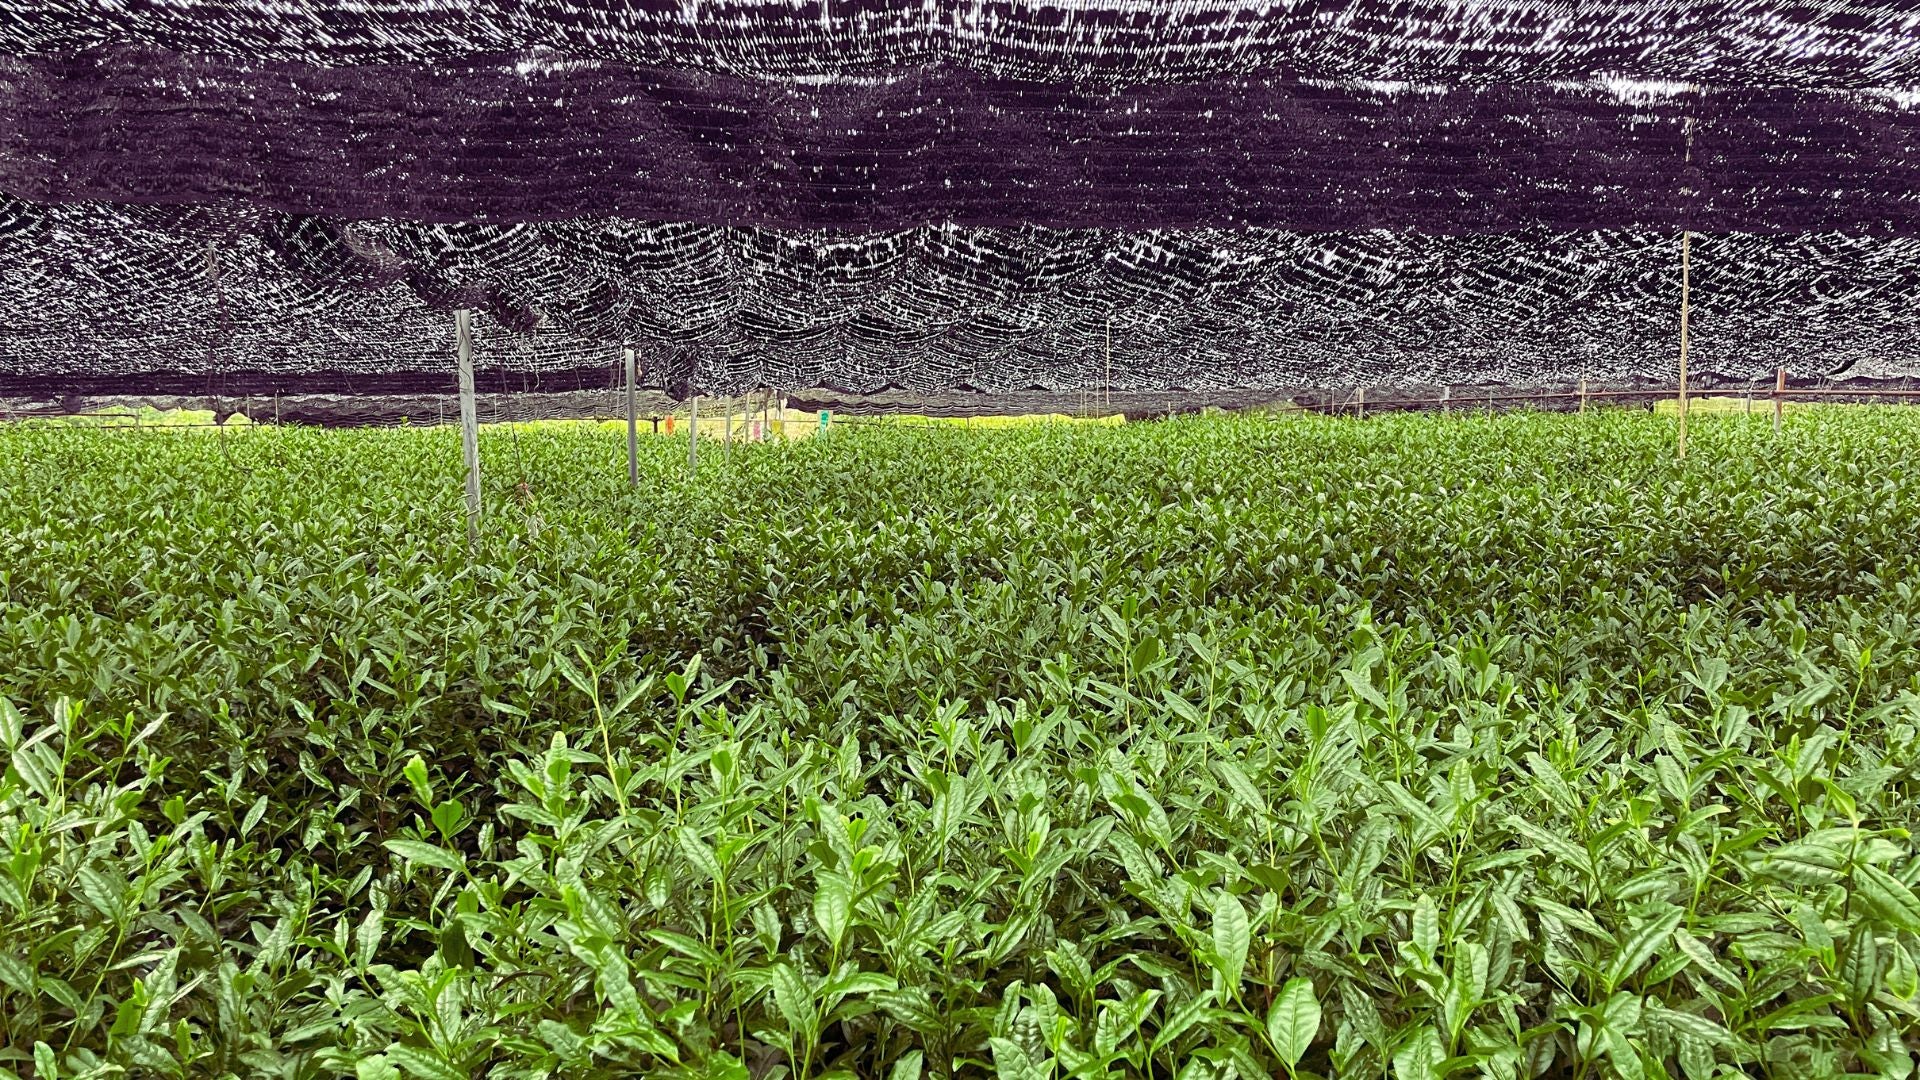 Matcha tea plants growing the traditional way under shade before the spring harvest